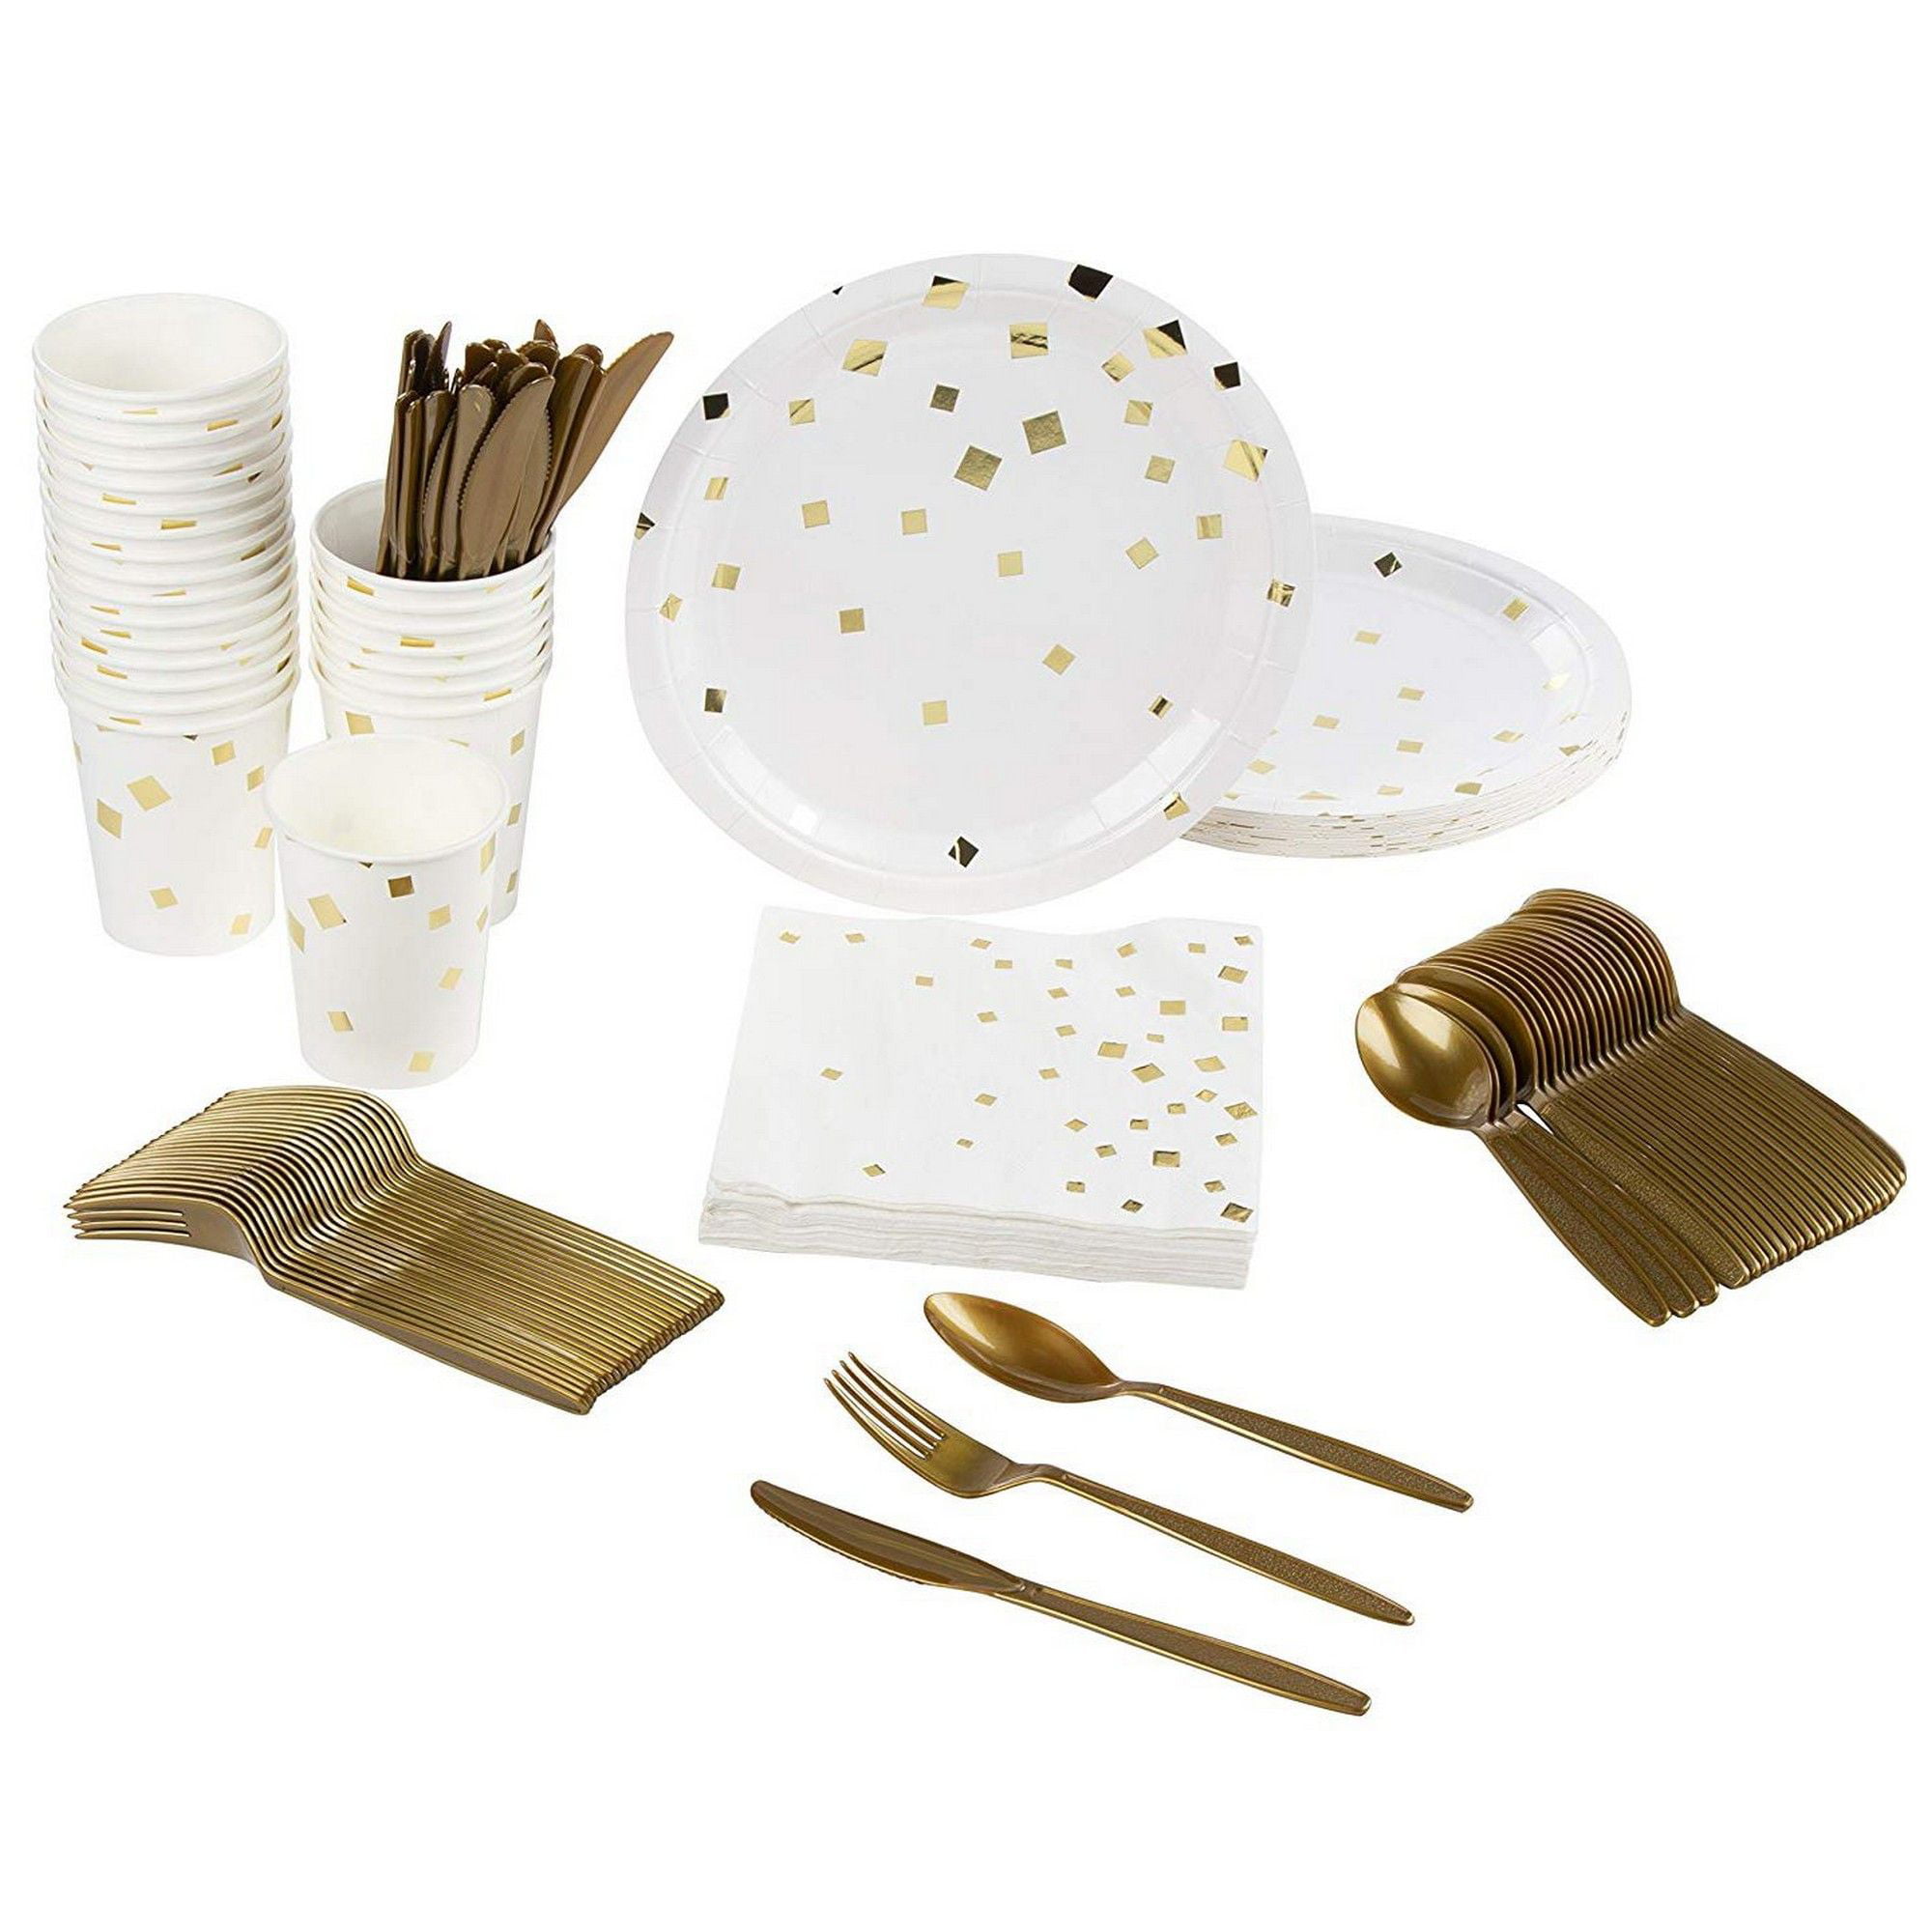 Serves 24 White and Gold Party Supplies, 144PCS Plates Napkins Cups, Favors Decorations Disposable Paper Tableware Kit Set for Wedding Bridal Shower Birthday Bachelorette Engagement Baby Shower